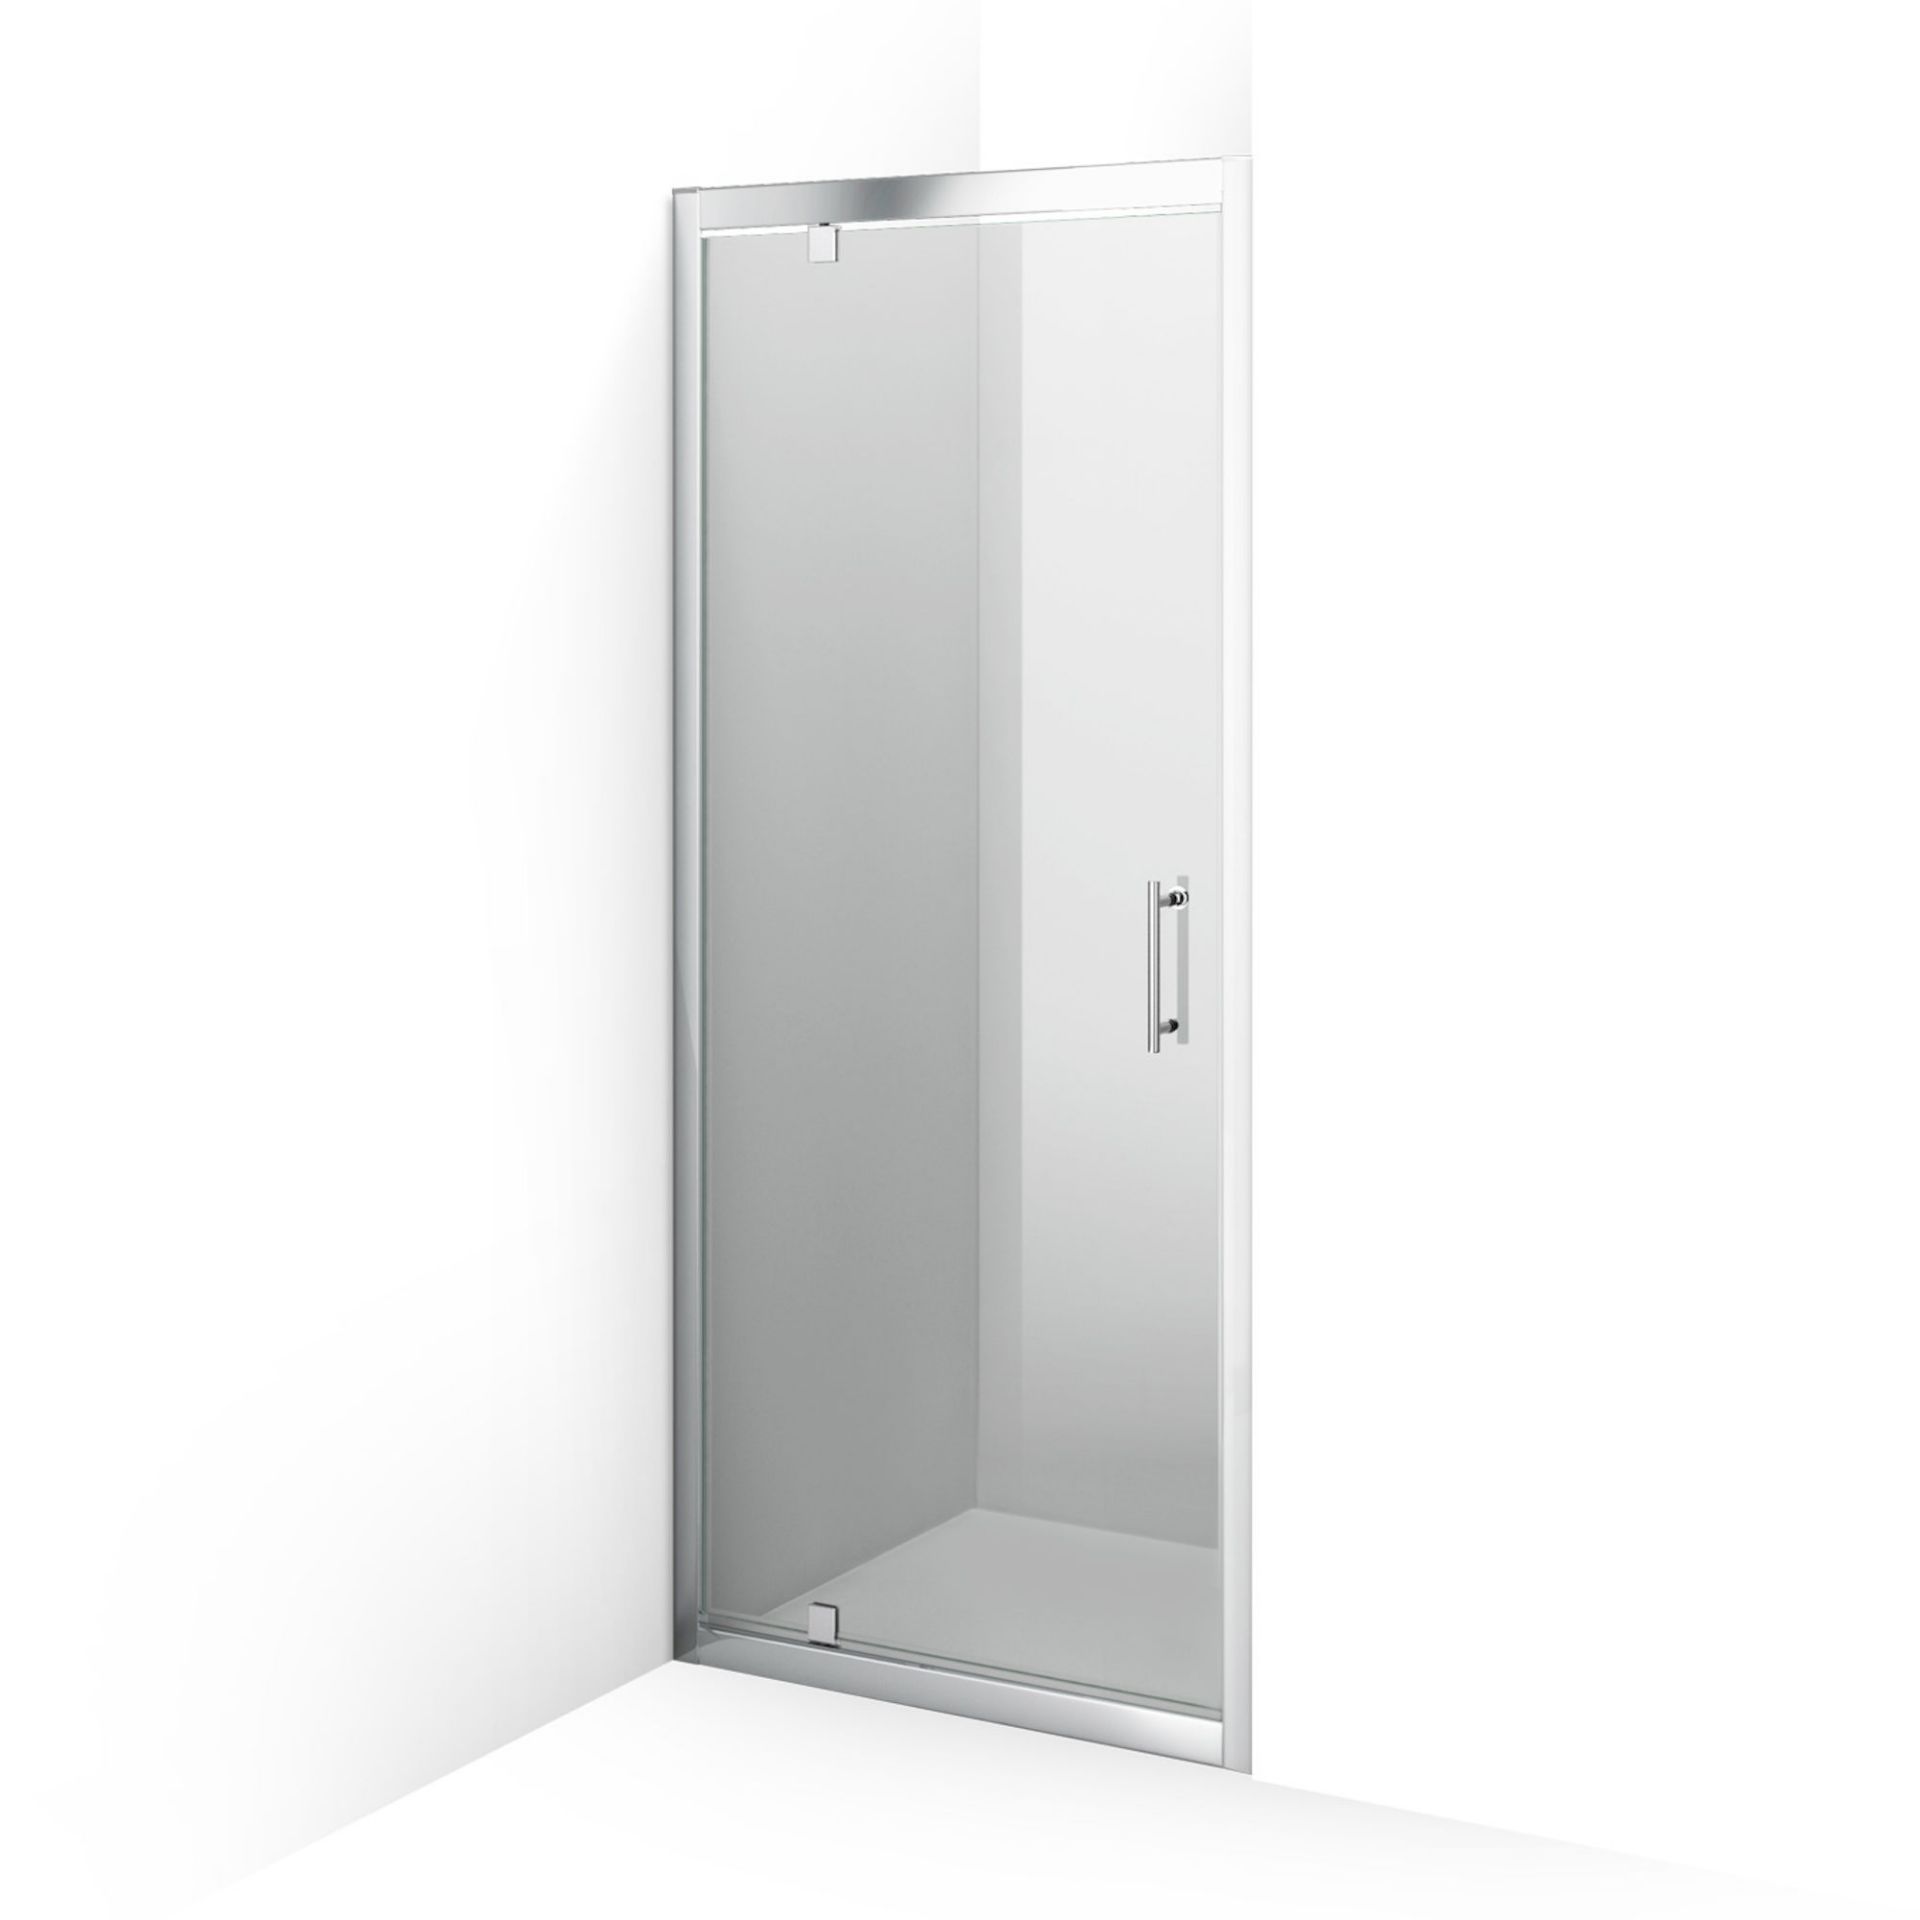 (EW126) 800mm - 6mm Elements Pivot Shower Door. RRP £299.99. 6mm Safety Glass Fully waterproof - Image 3 of 3